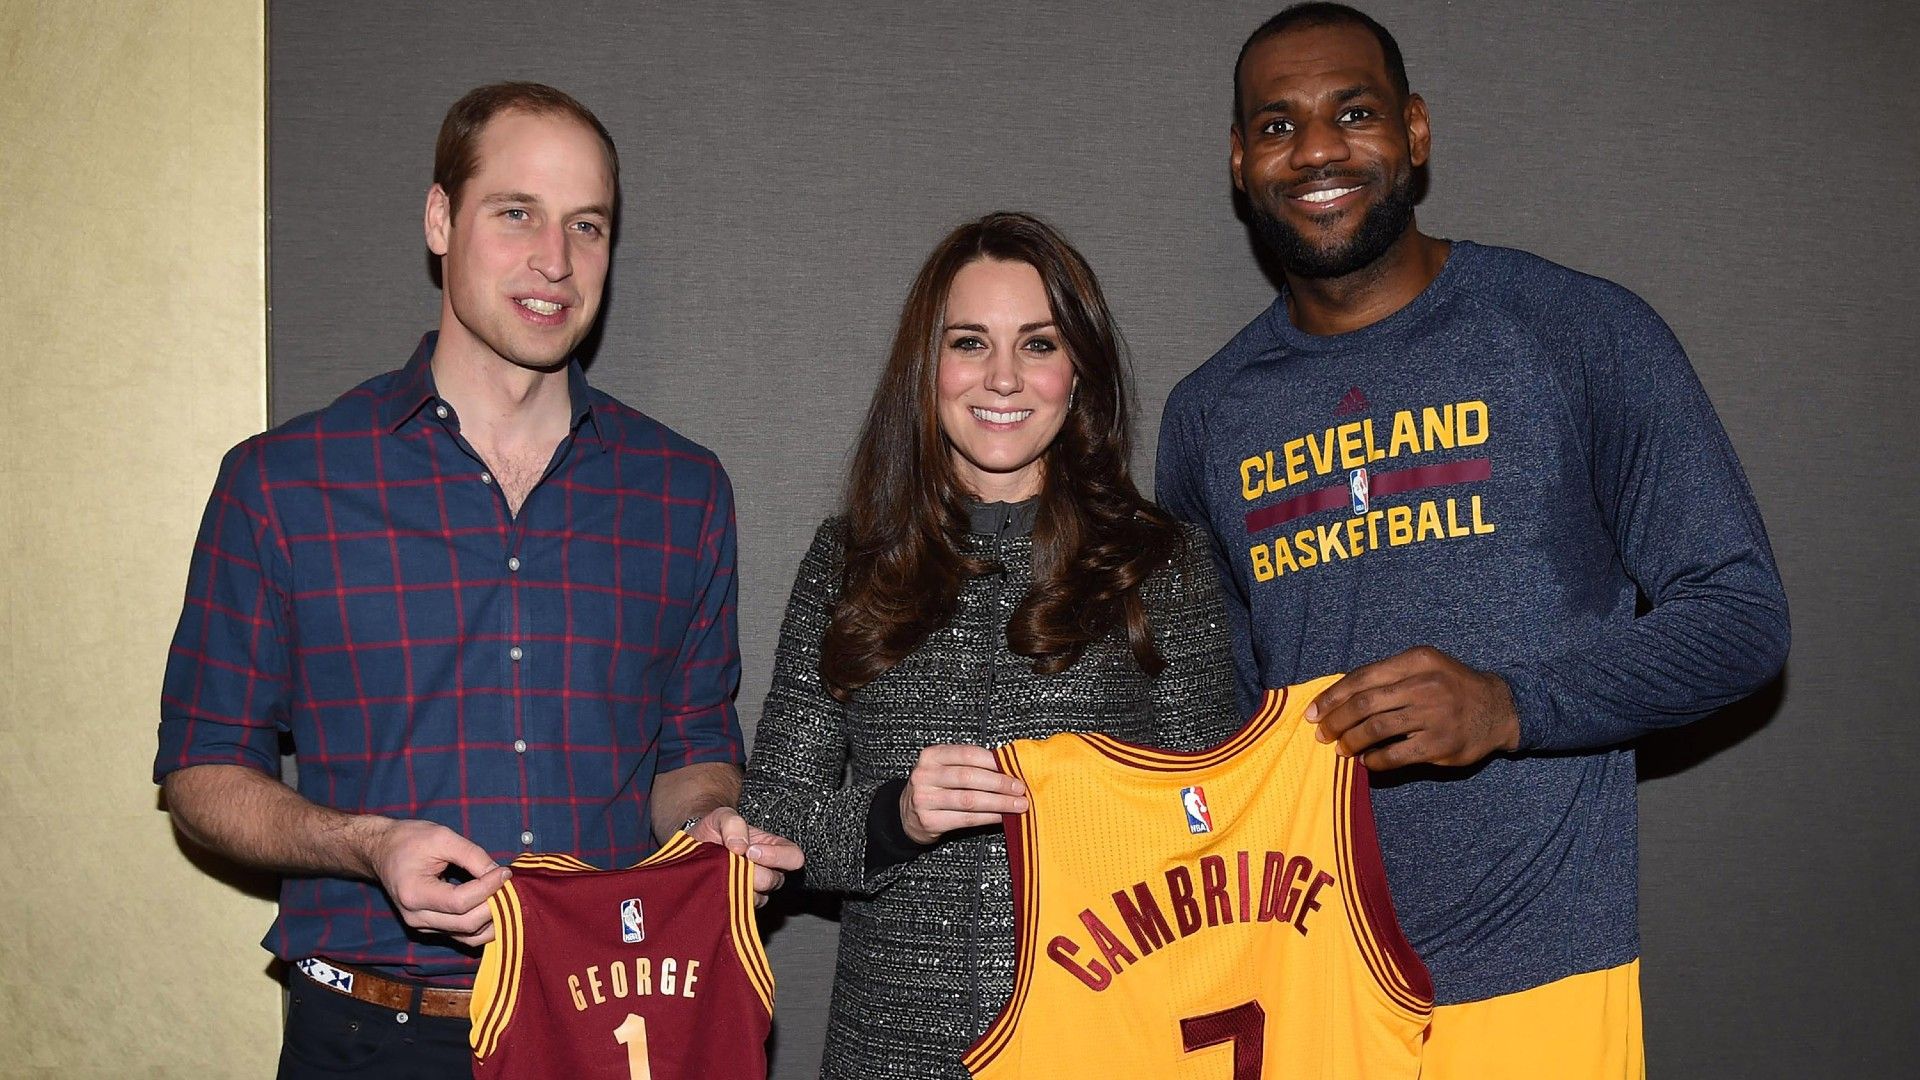 <p>                     US basketball star LeBron James has a nickname of King James, and this King got to meet the future King and Queen for real during William and Kate's 2014 visit to New York City.                   </p>                                      <p>                     The royals watched court-side as LeBron led the his squad to victory and after the game, LeBron met the Duke and Duchess of Cambridge and even presented them with a tiny Cavs jersey to give to the then one year-old Prince George.                   </p>